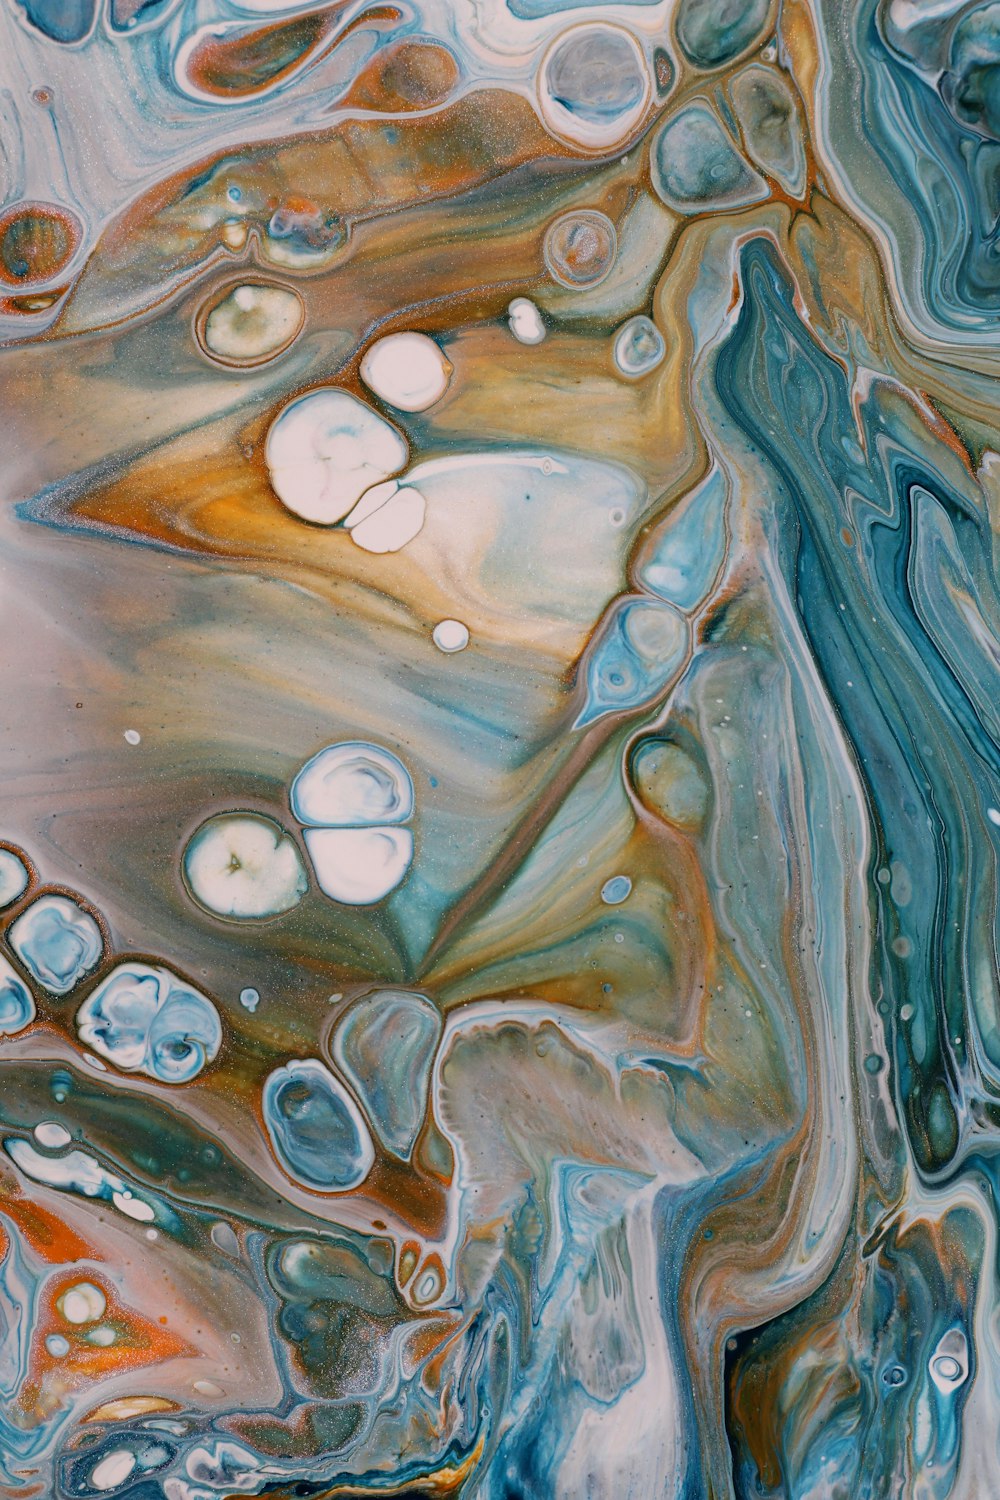 a close up of an abstract painting with blue, brown, and white colors